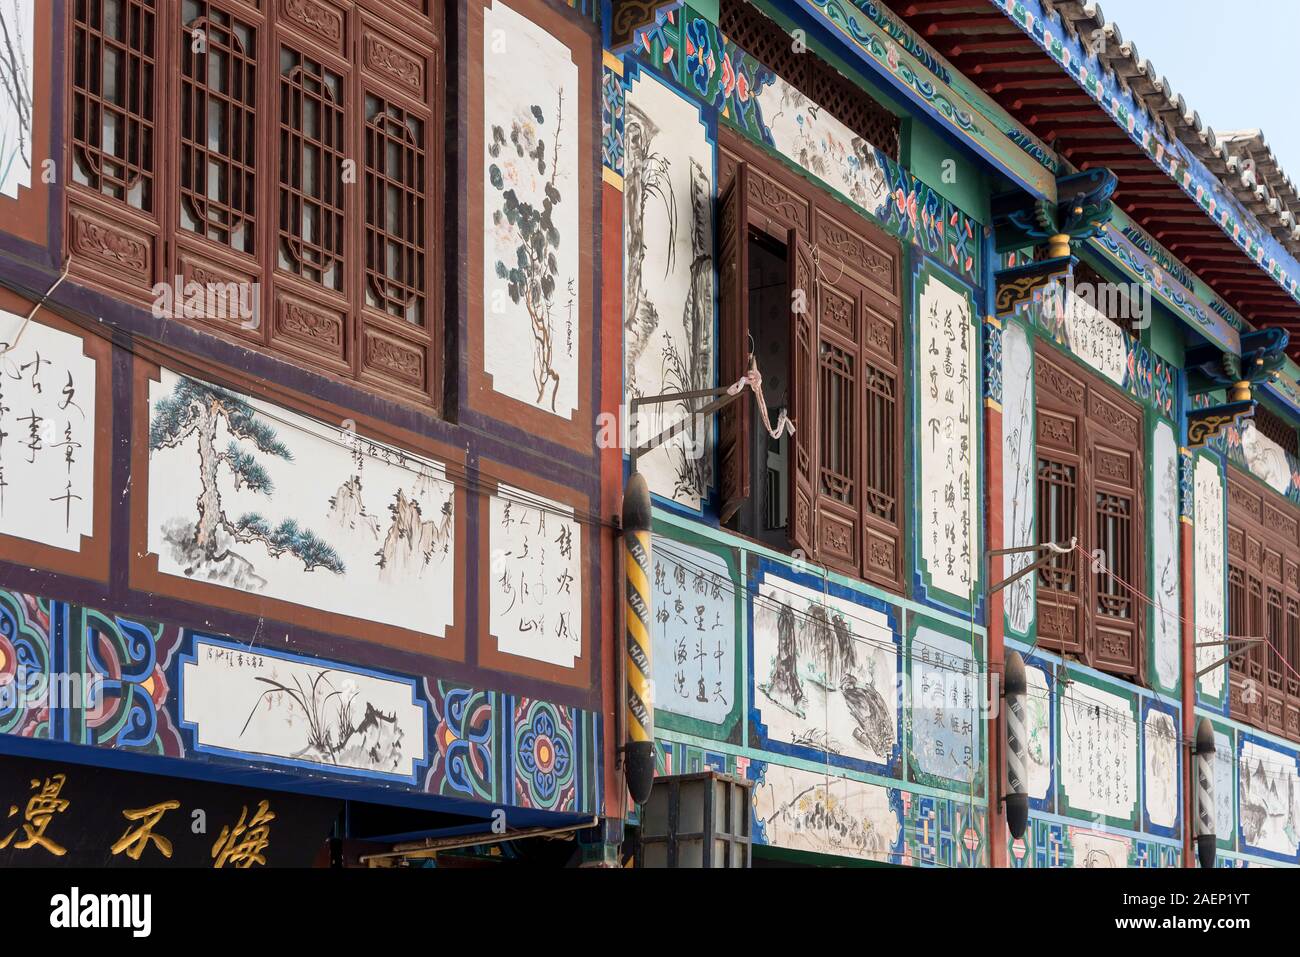 March 7, 2019: Facade of the Zhu family residence, an old traditional chinese house in Jianshui, China Stock Photo